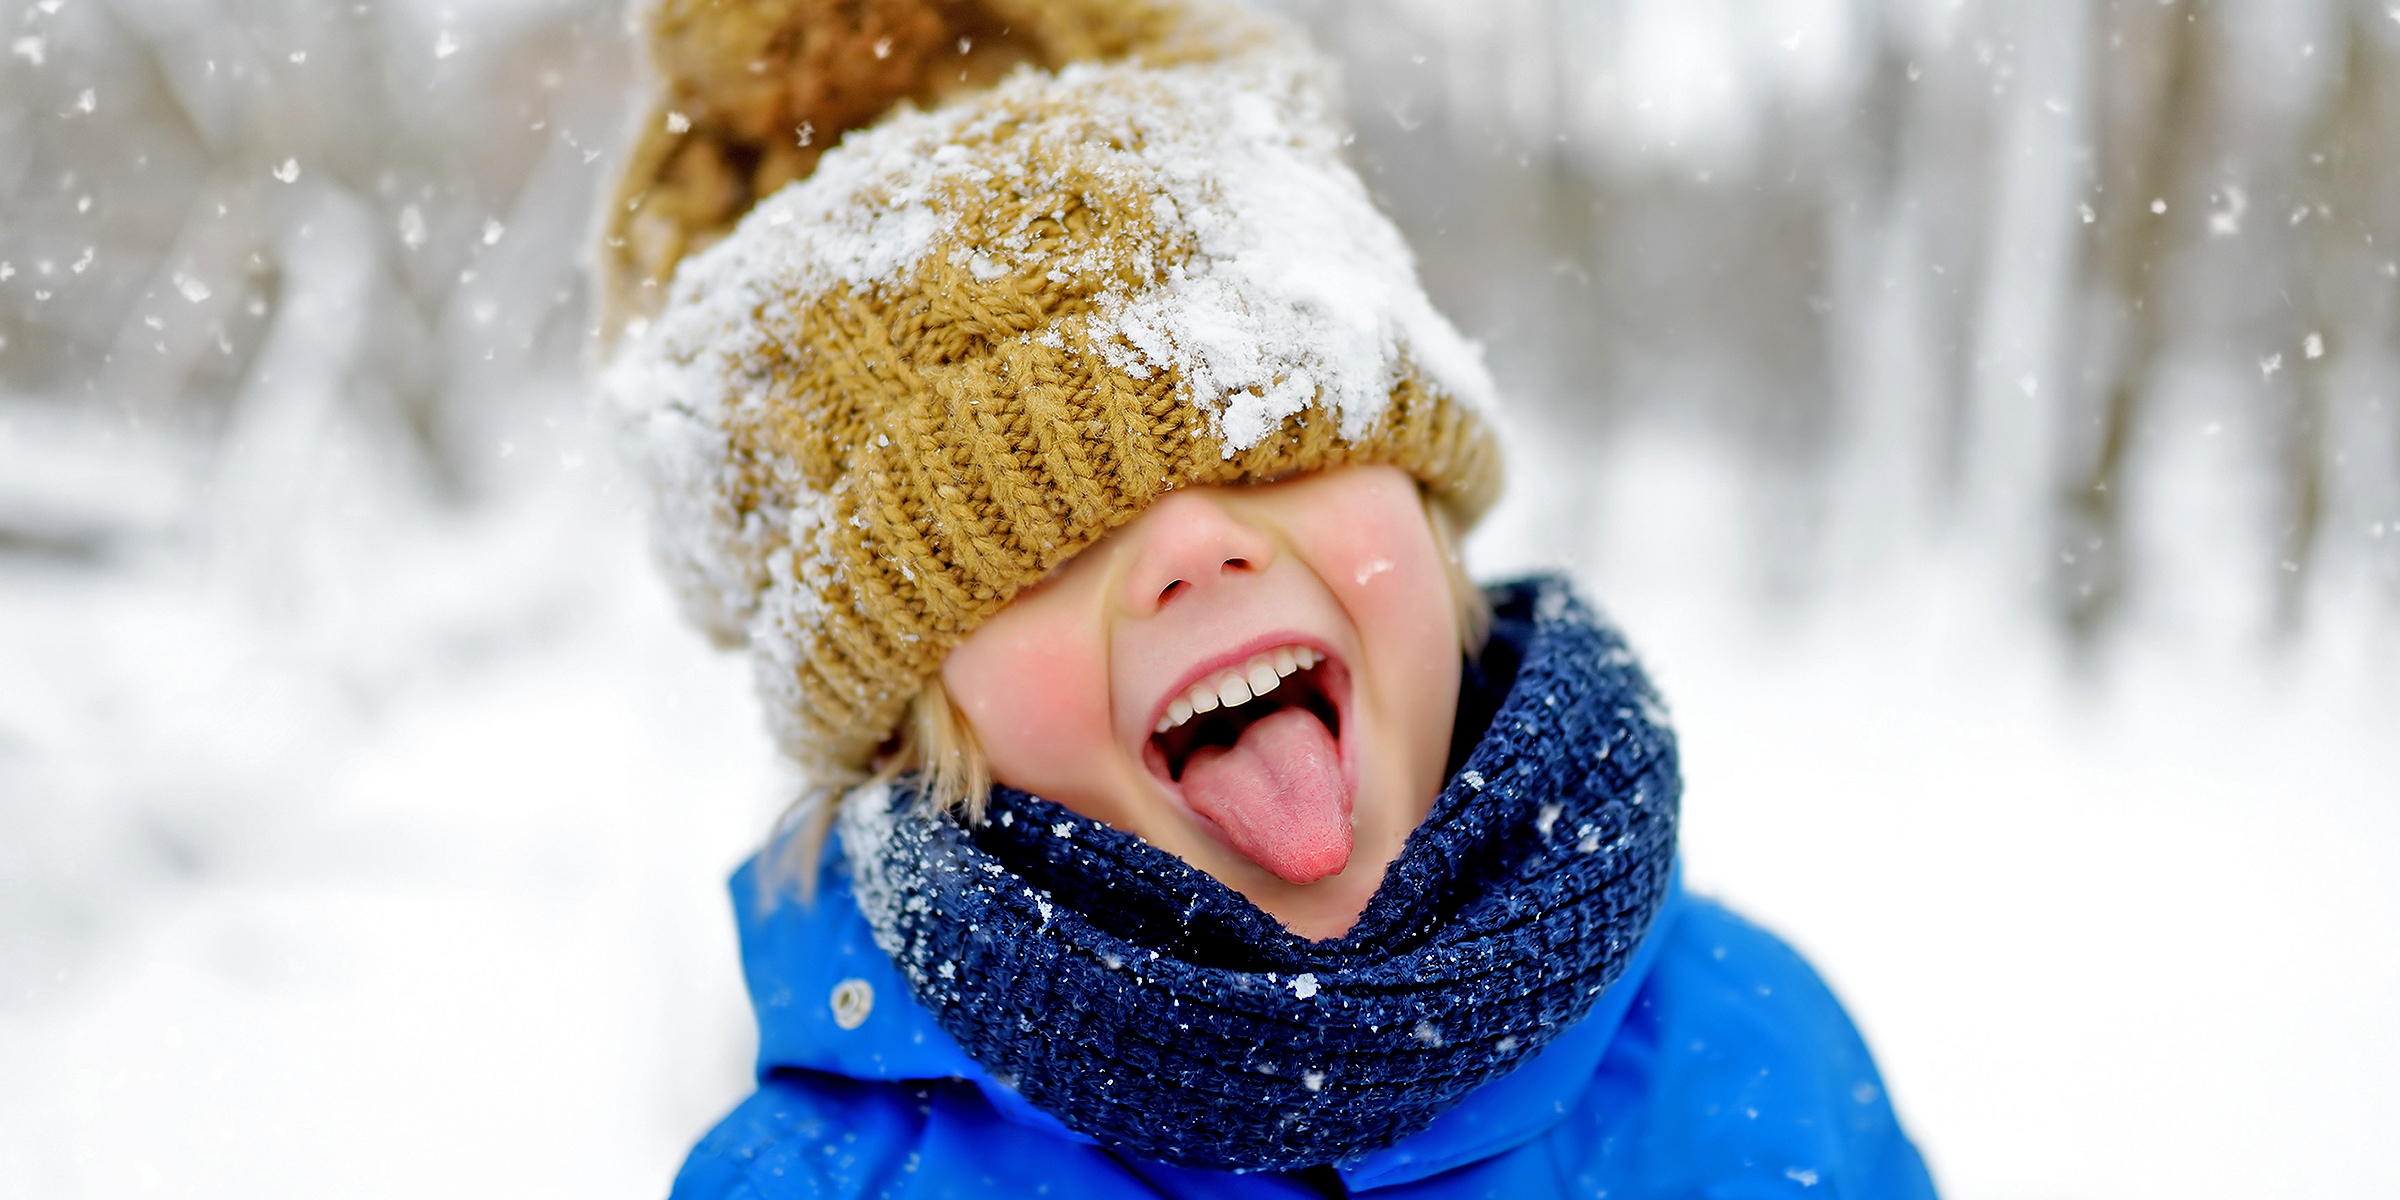 A child delighting in the snow | Source: Shutterstock